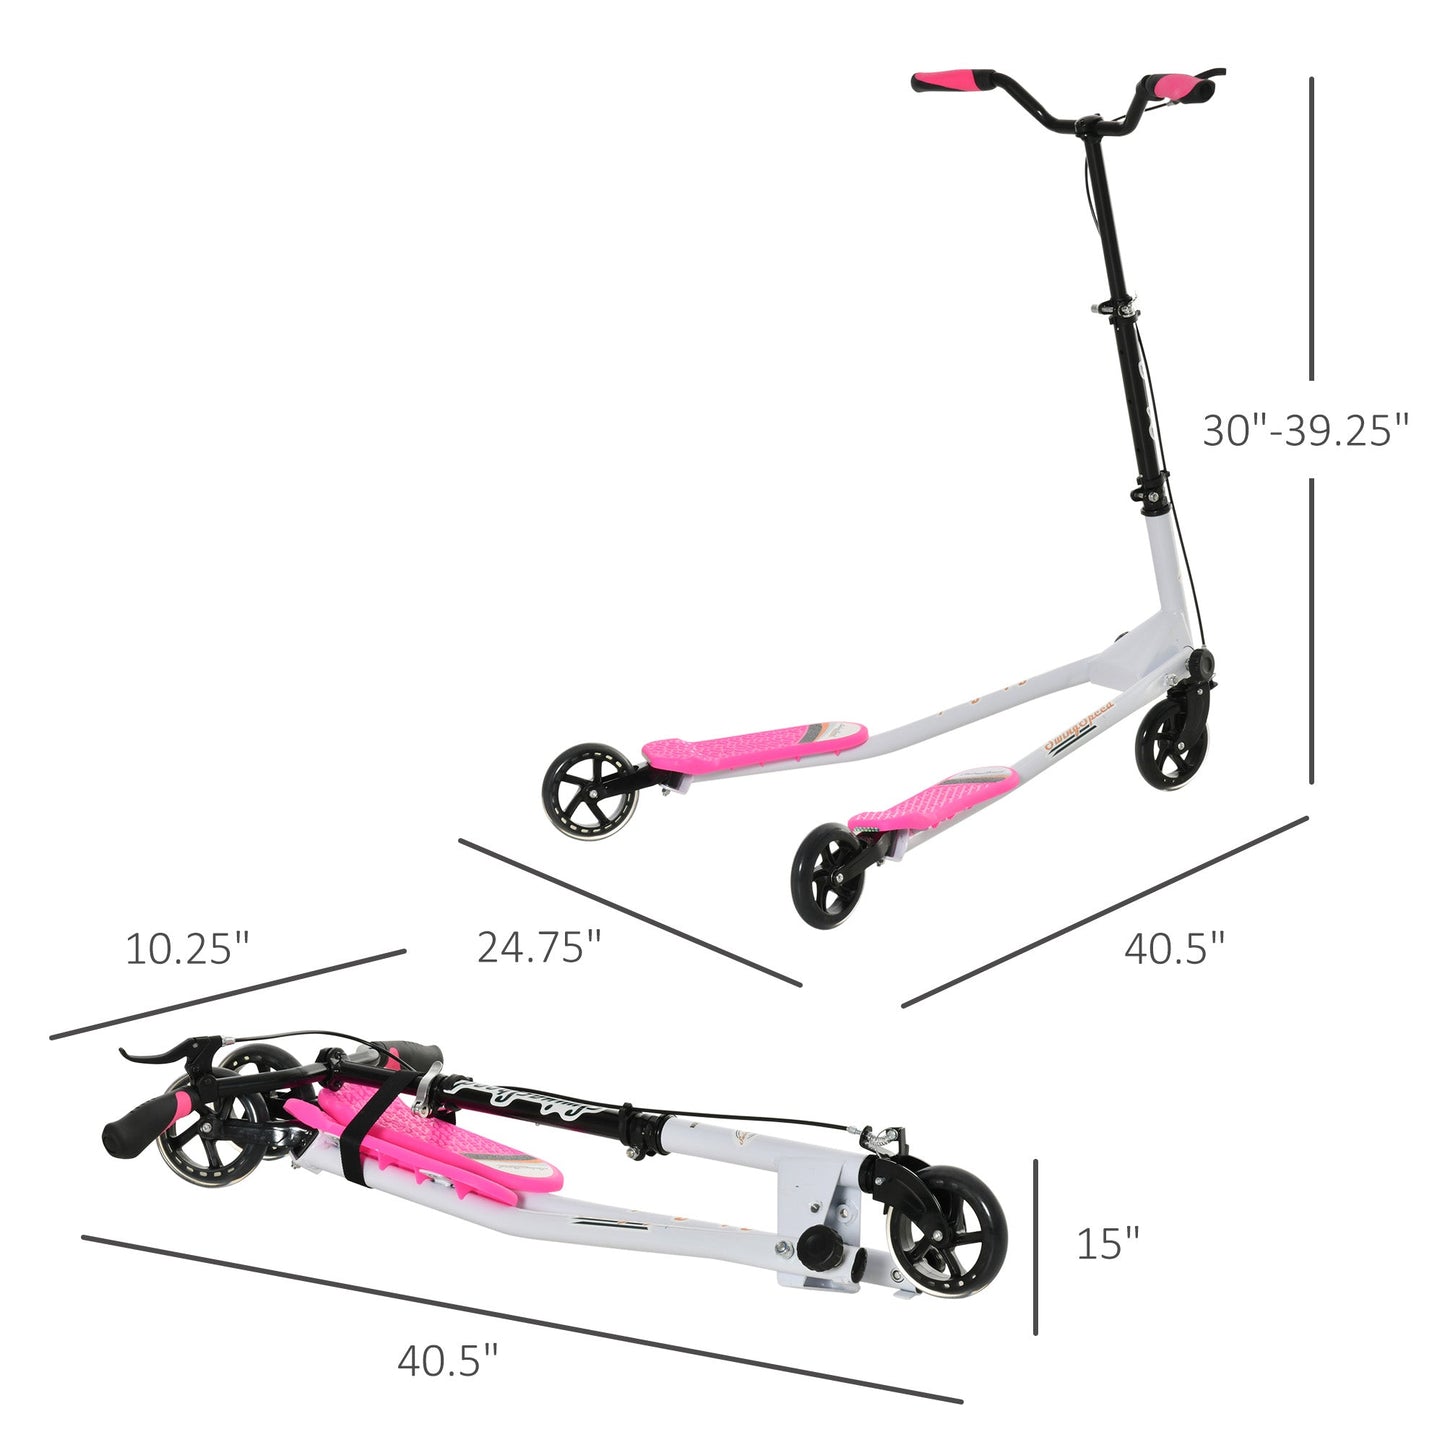 Kids/Adult Drifting Scooter 3 Wheels Scooter Foldable Child Tri Speeder Slider Swing Drifter Winged Push Motion Kickboard Height Adjustable for Age 6+ Pink at Gallery Canada